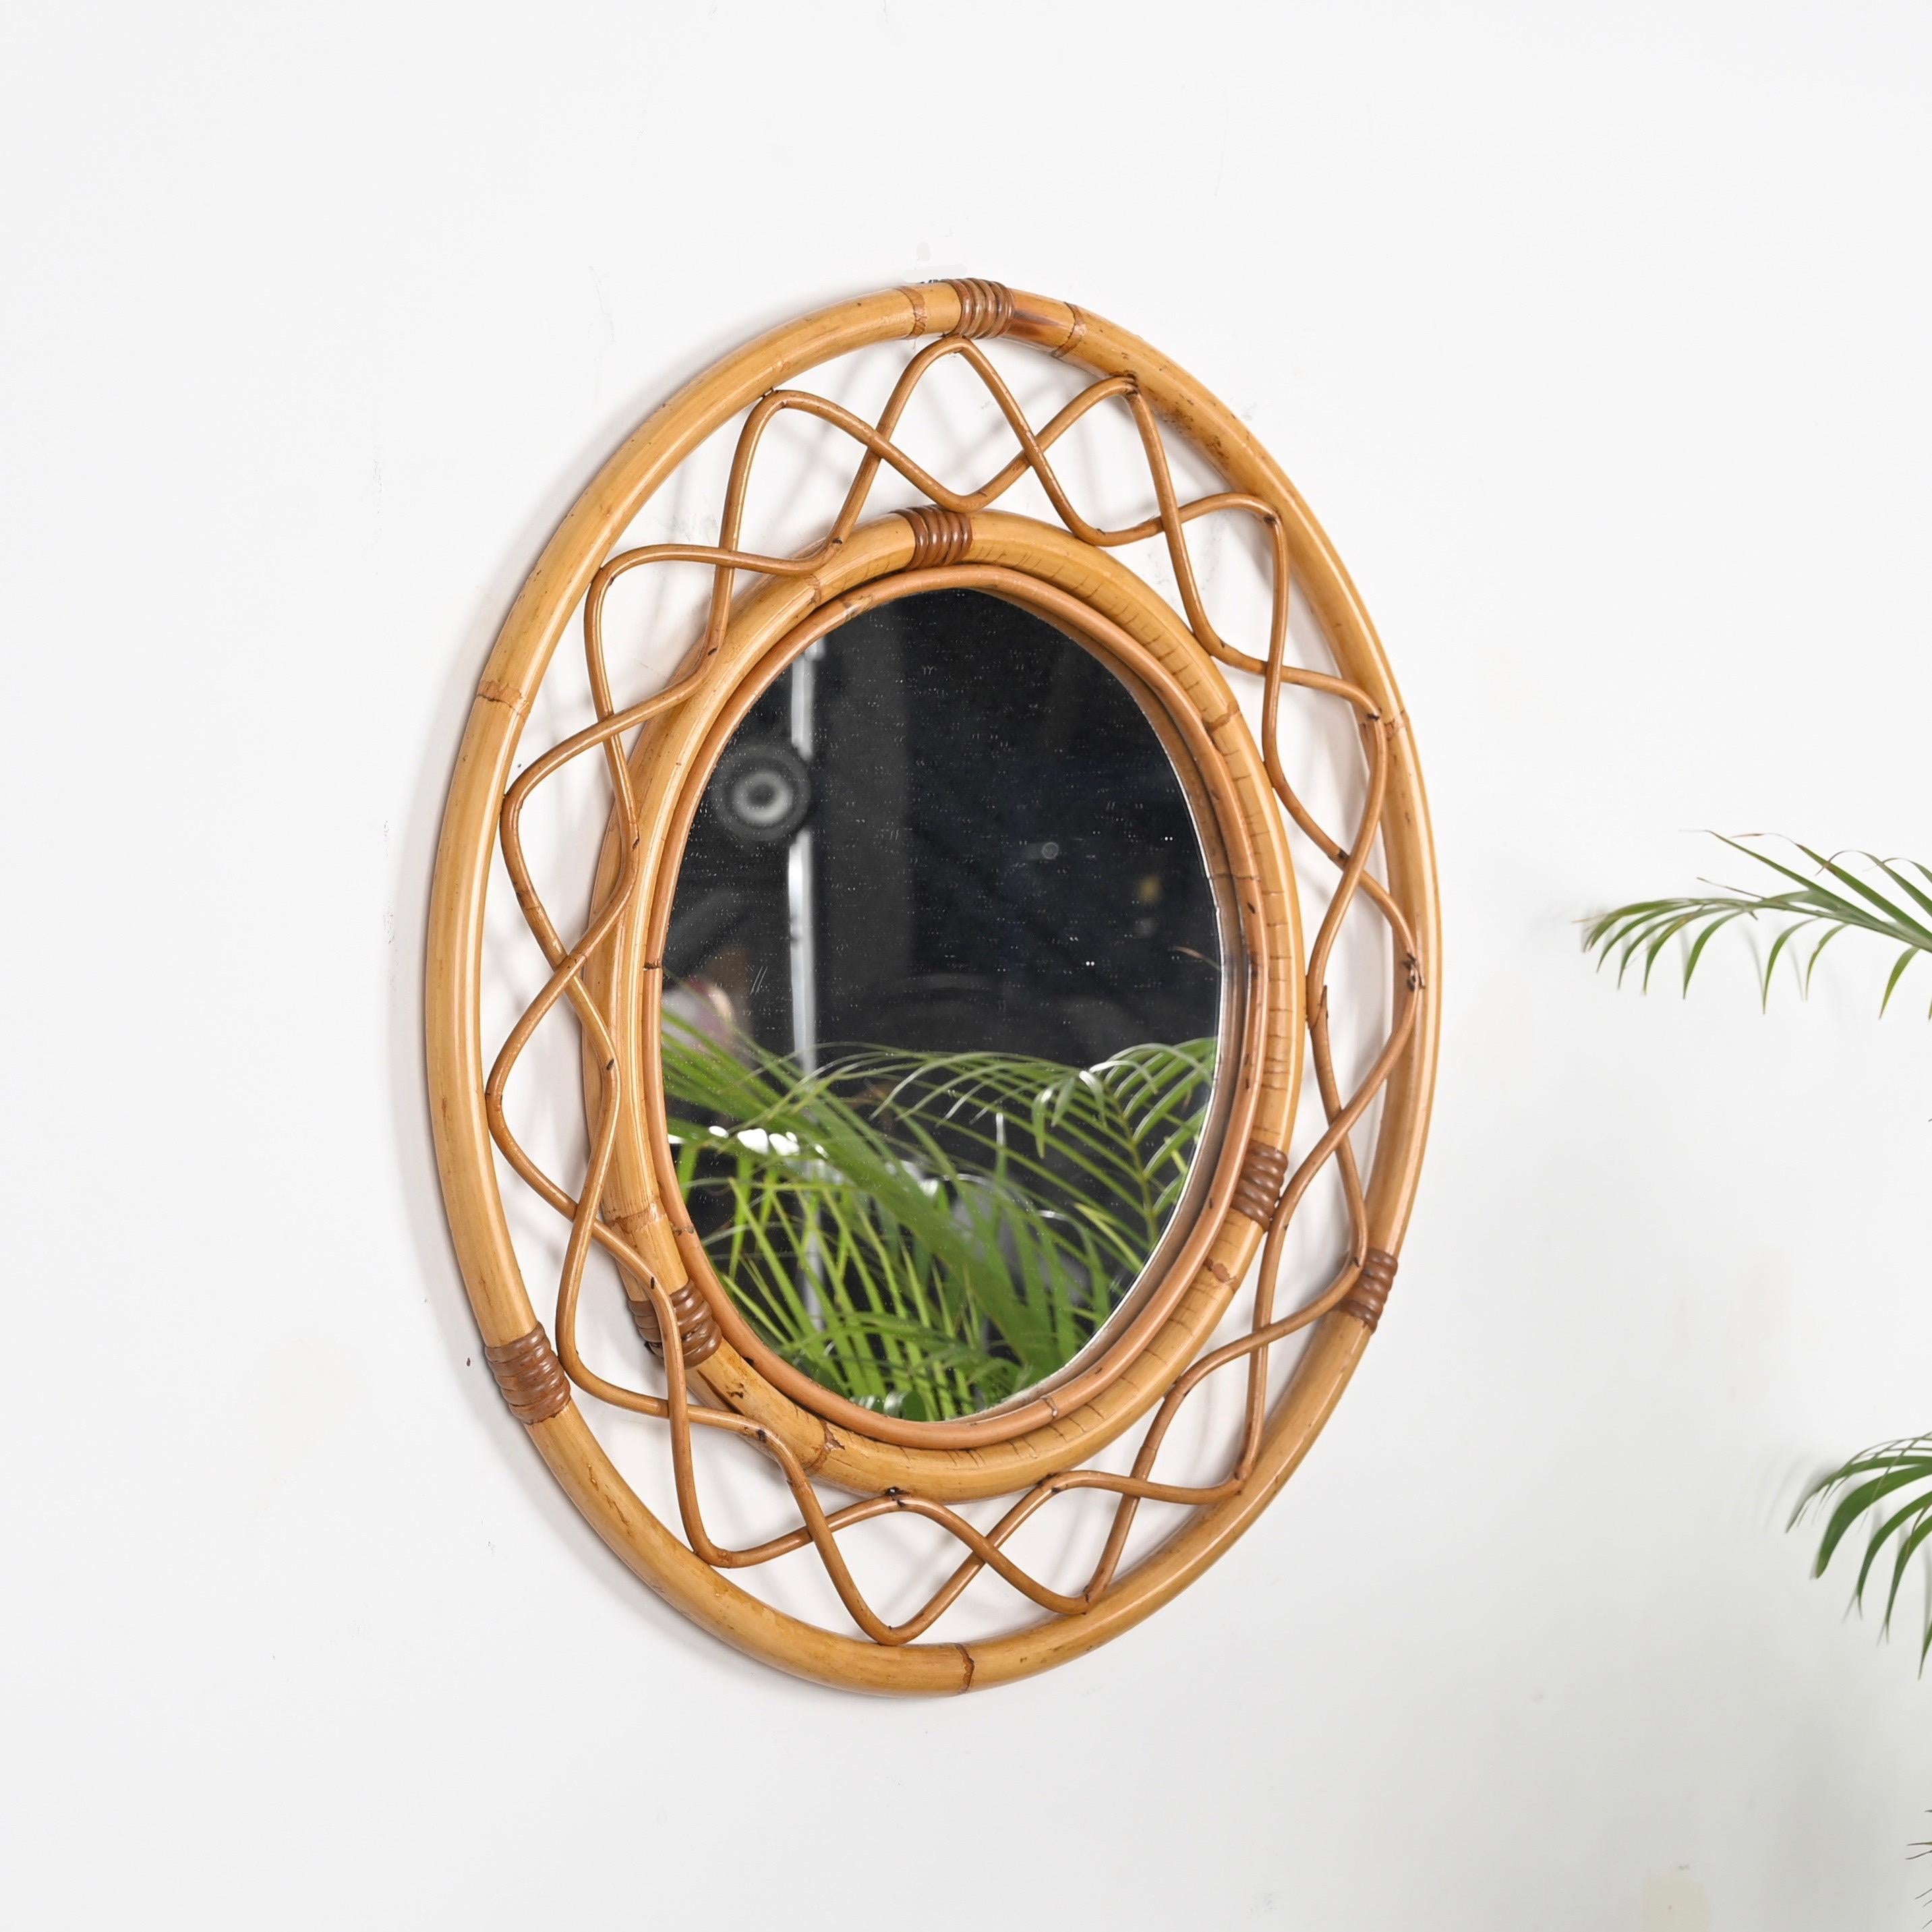 Midcentury Round Italian Mirror, Curved Bamboo, Rattan and Wicker Frame, 1960s For Sale 2